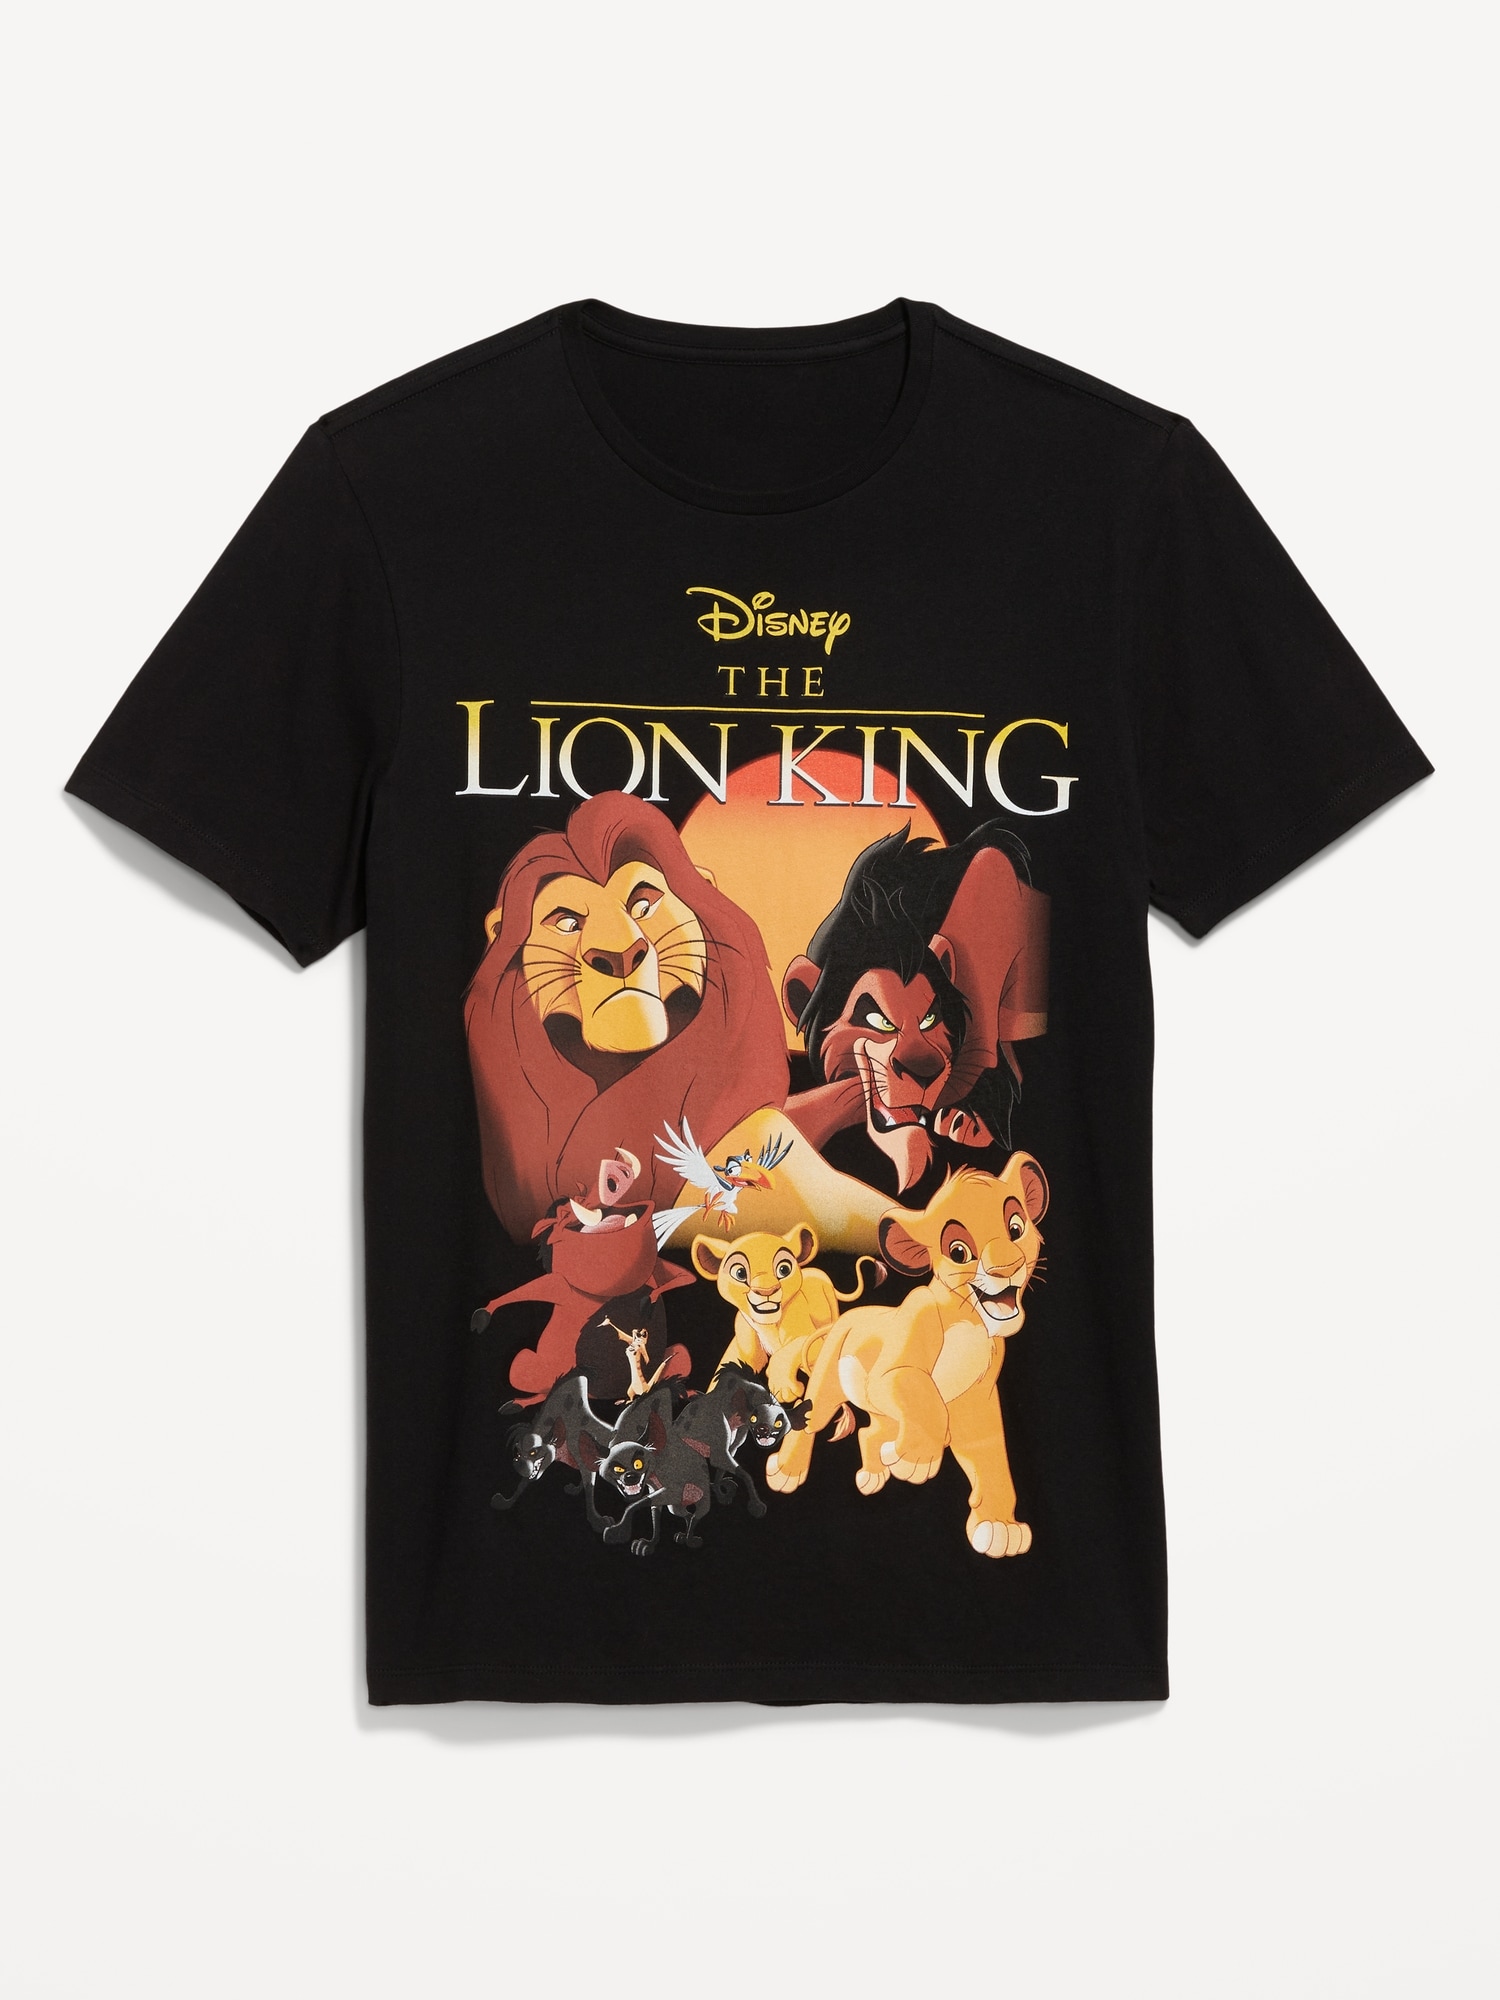 Disney The Lion King Gender-Neutral T-Shirt for Adults